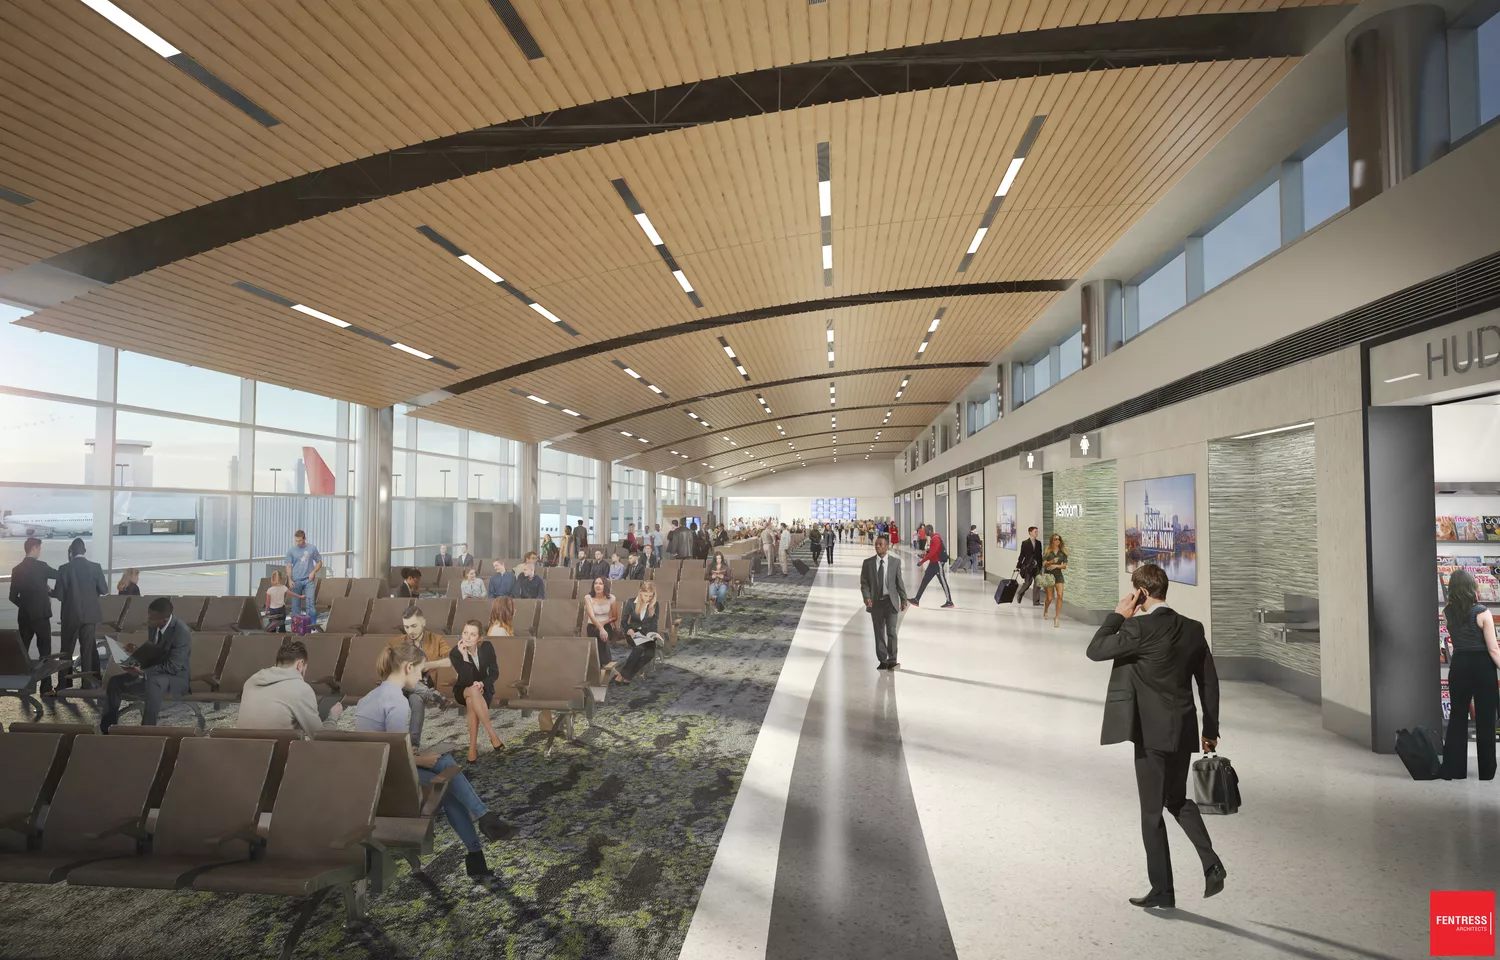 Interior daylight rendering of Nashville International Airport's Concourse D and Terminal Wings Expansion with views of retail shops, seated passengers, and tarmac views beyond